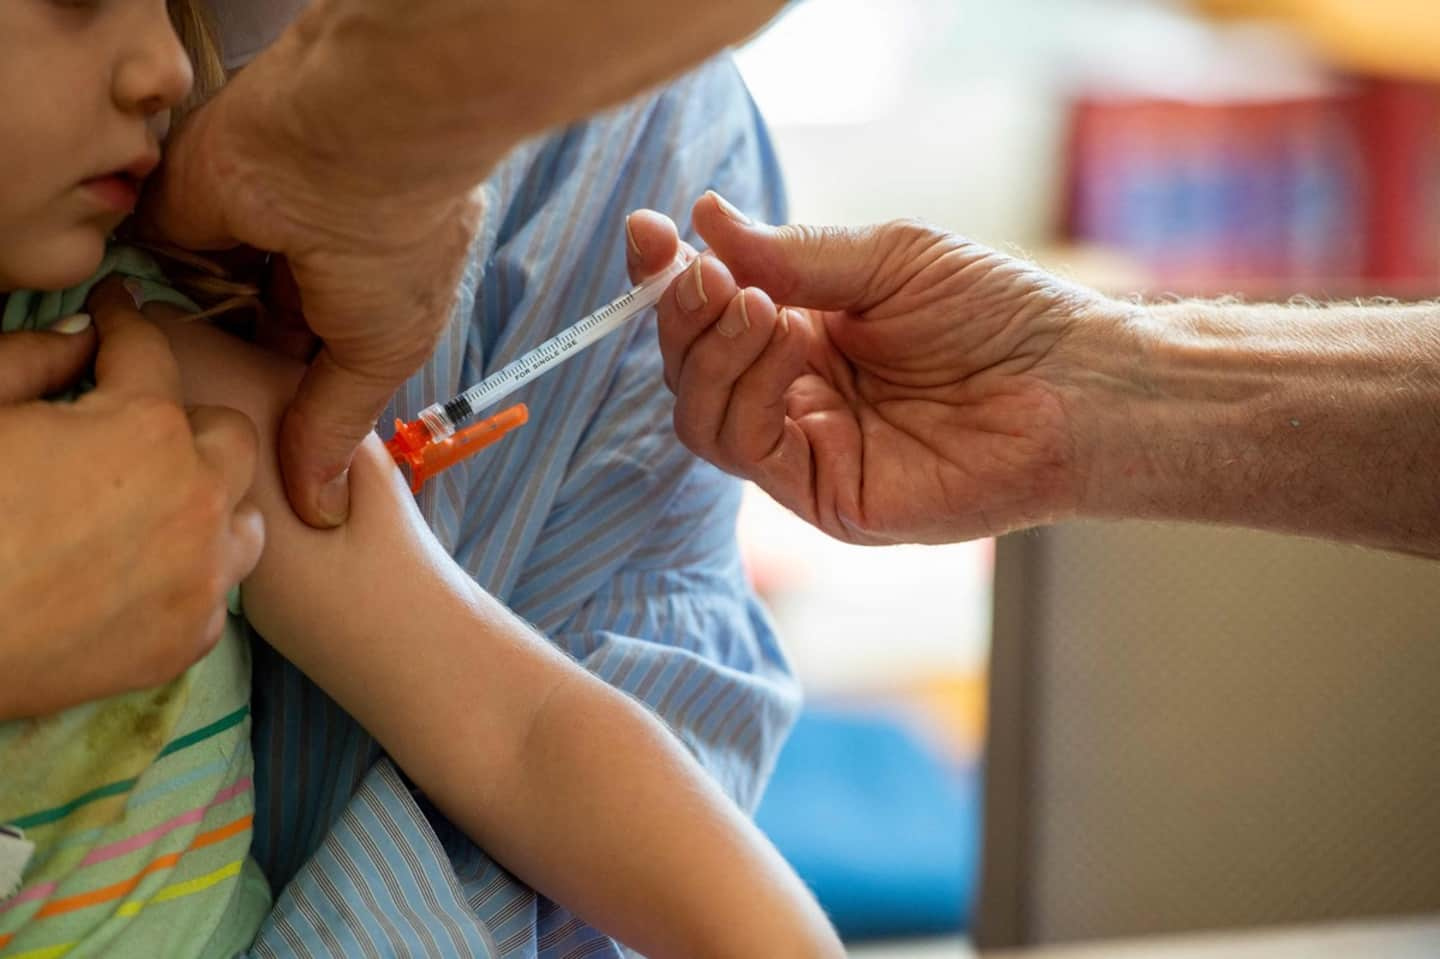 COVID-19: Health Canada authorizes a first vaccine for children aged 6 months to 5 years